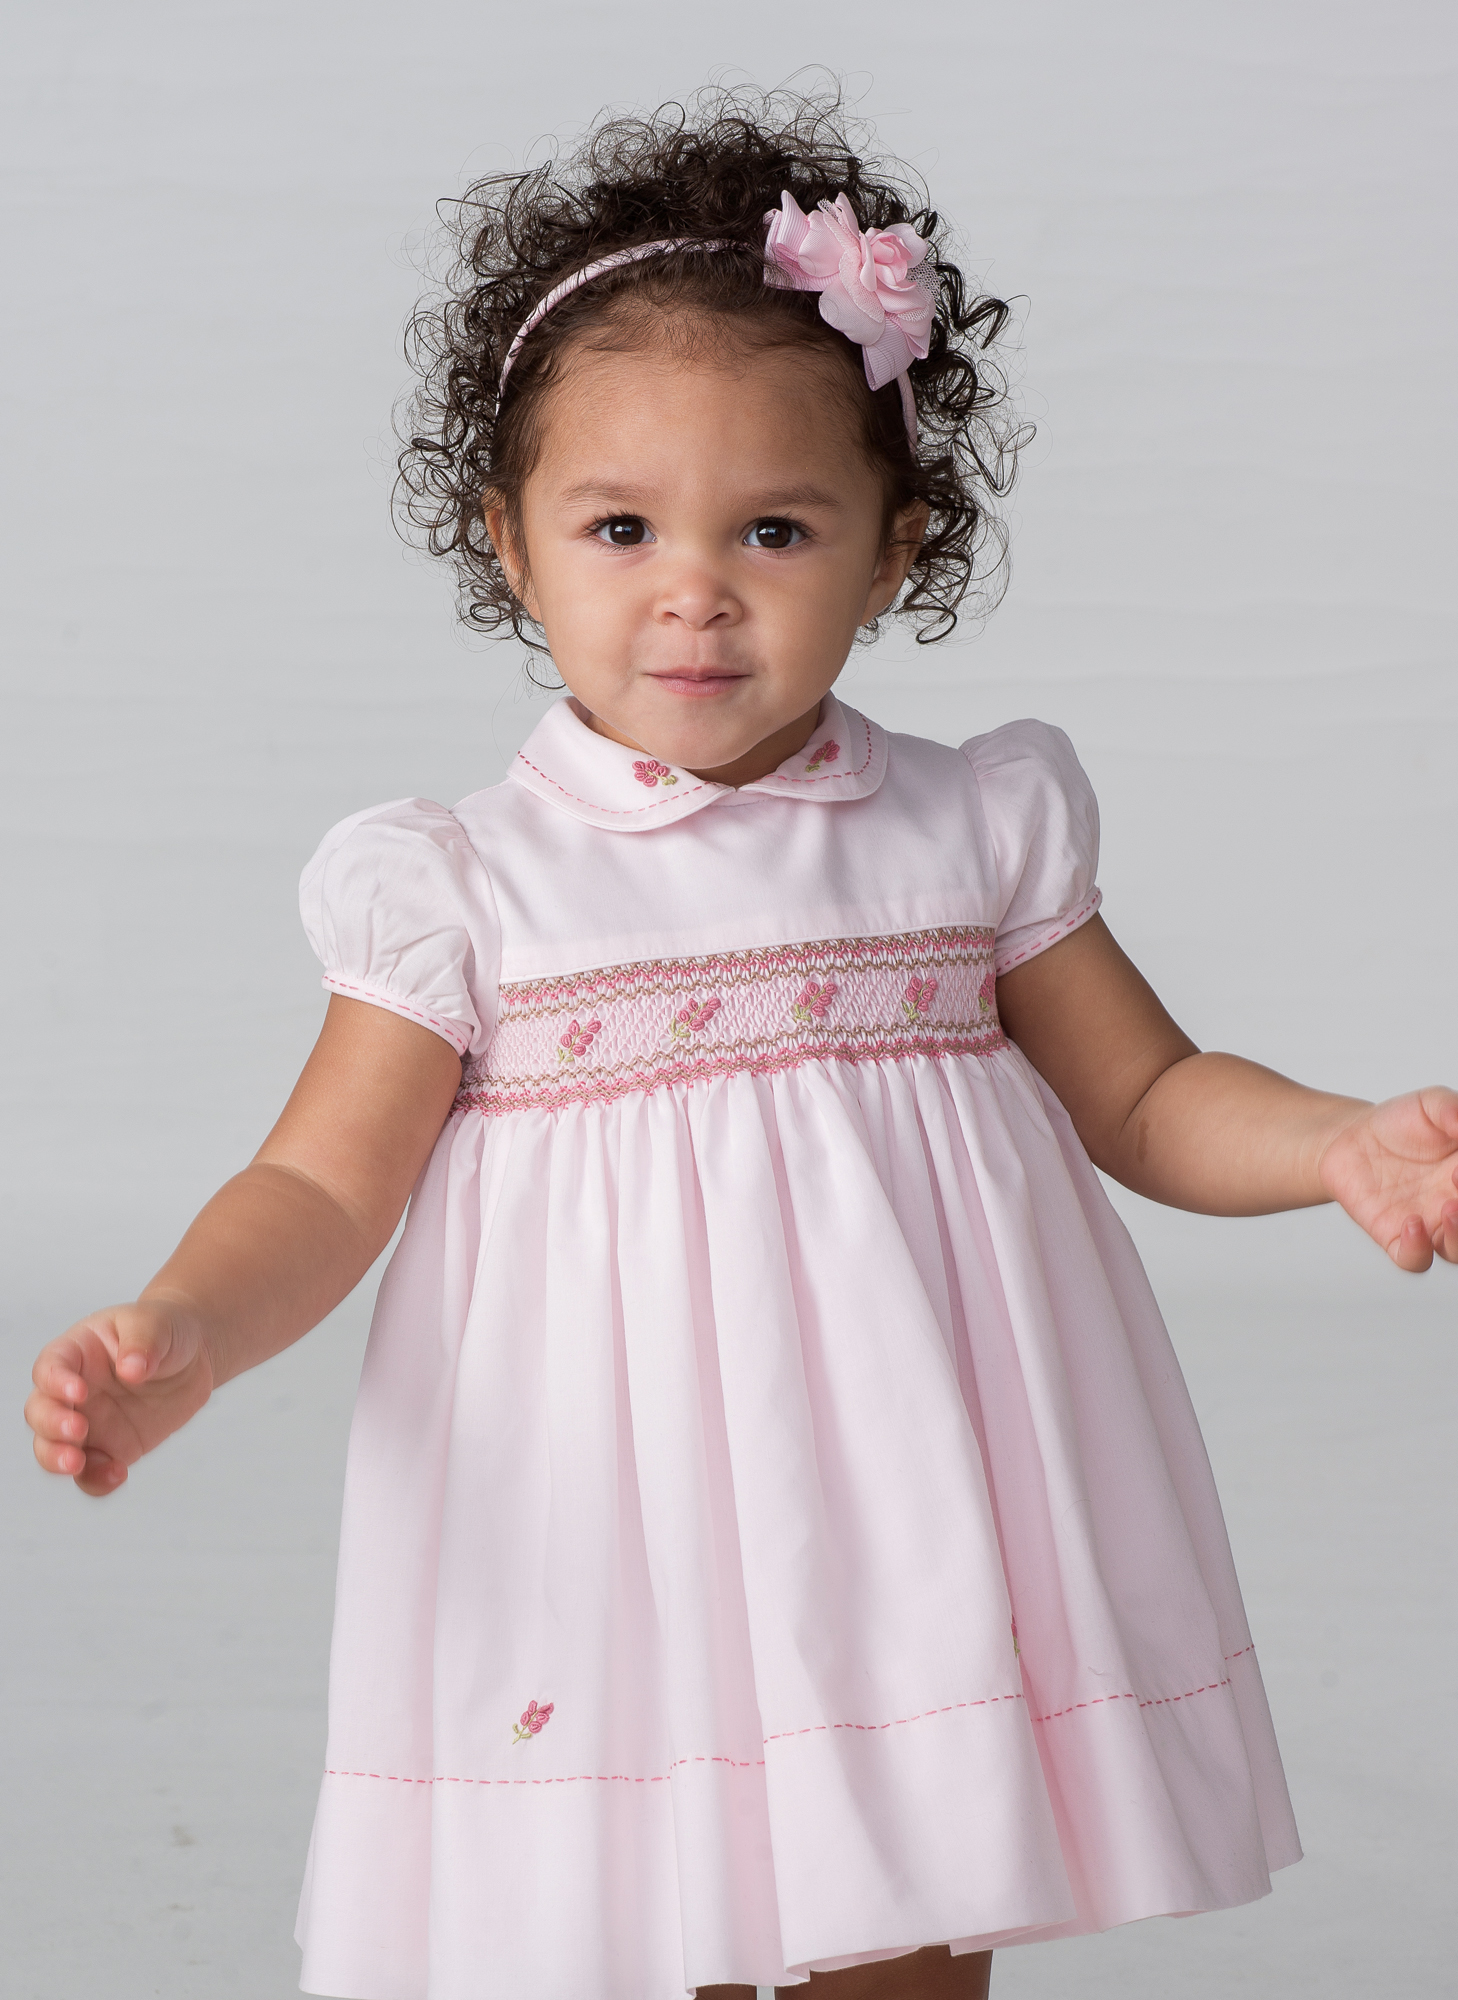 Blossom Dress Baby Boutique Clothing